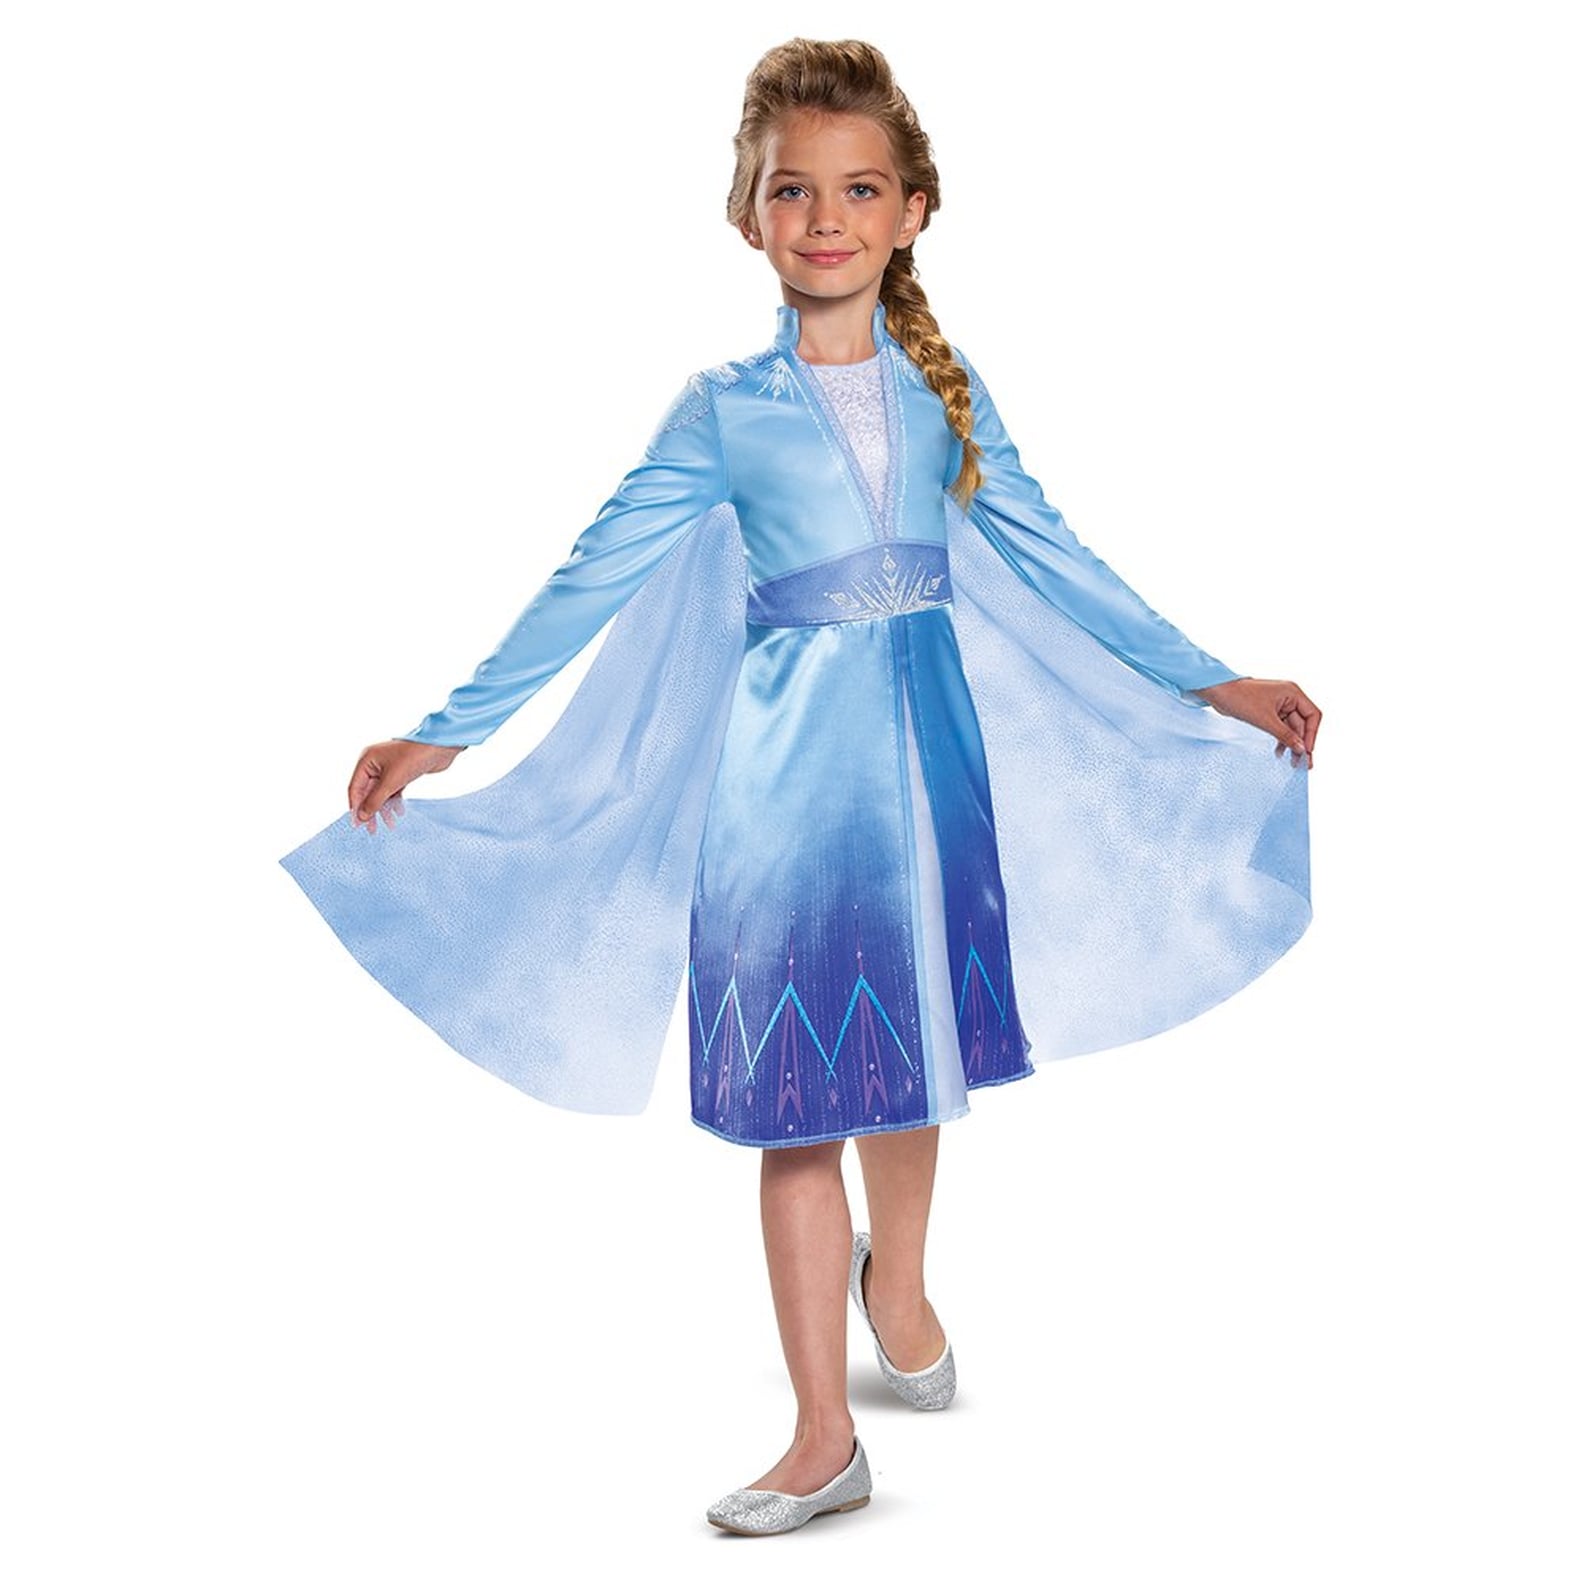 Frozen 2 Costumes and Toys at Walmart | POPSUGAR Family